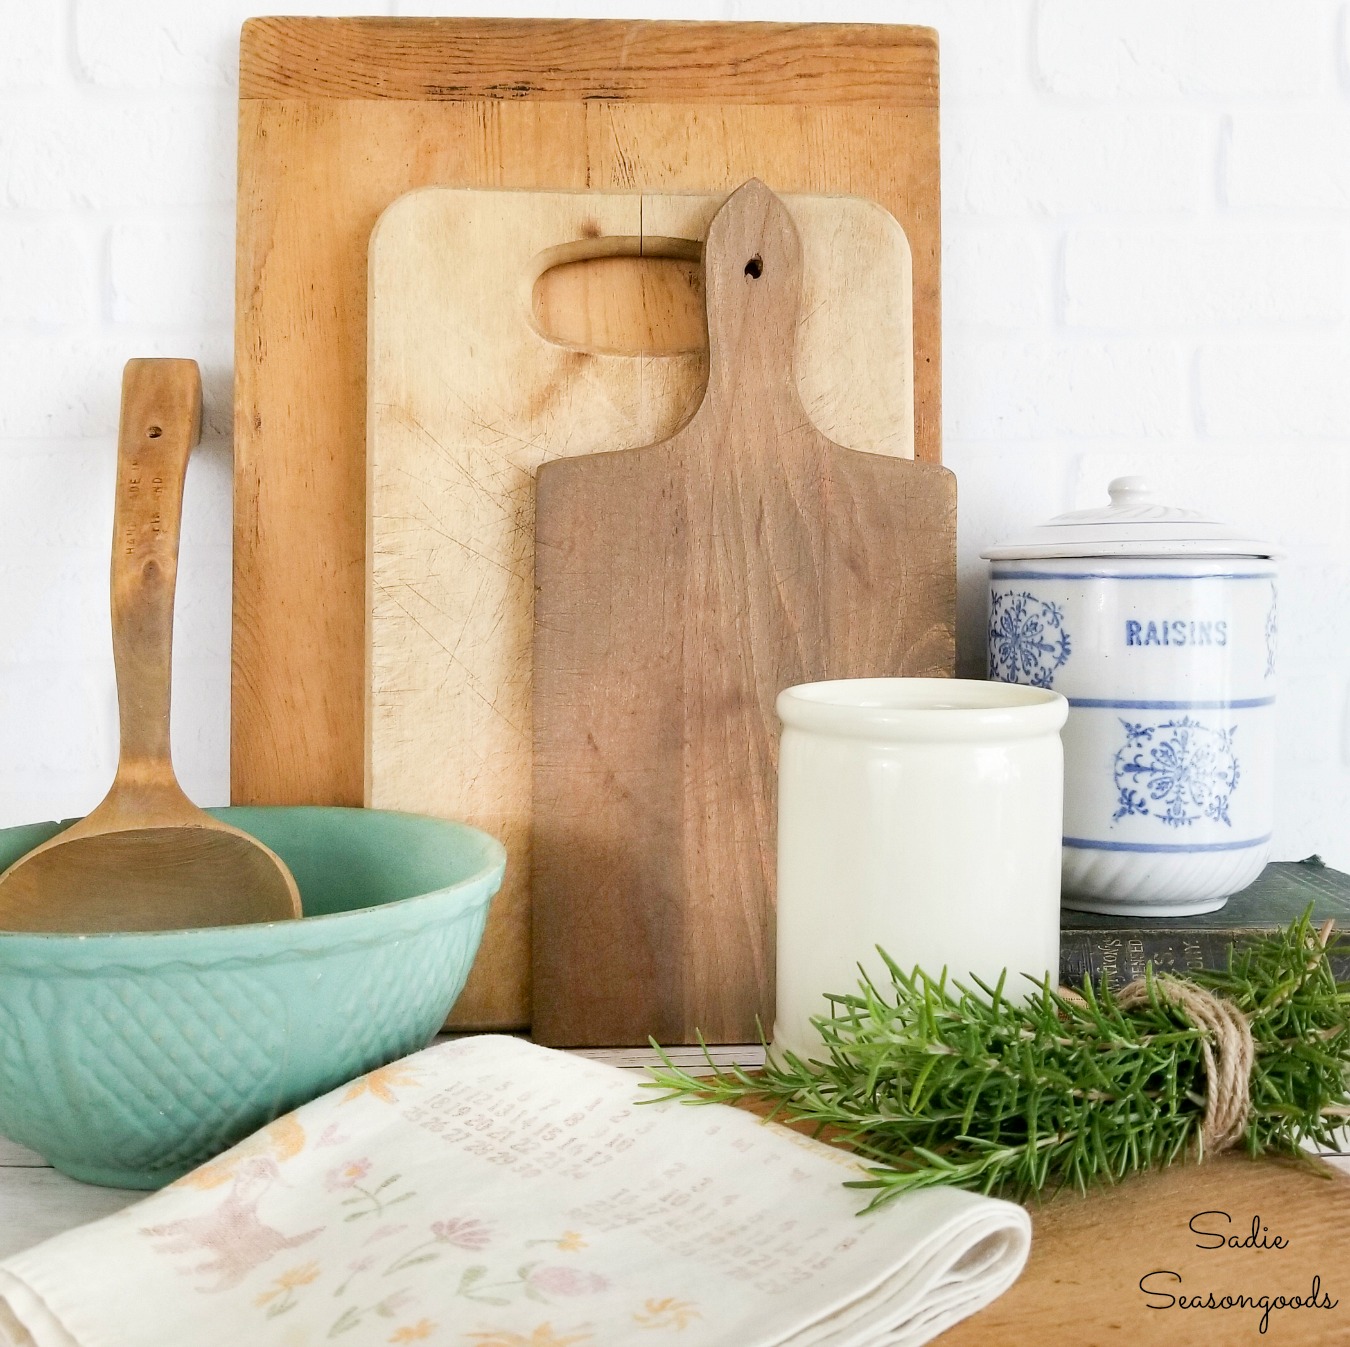 French farmhouse decor from the Thrift Store